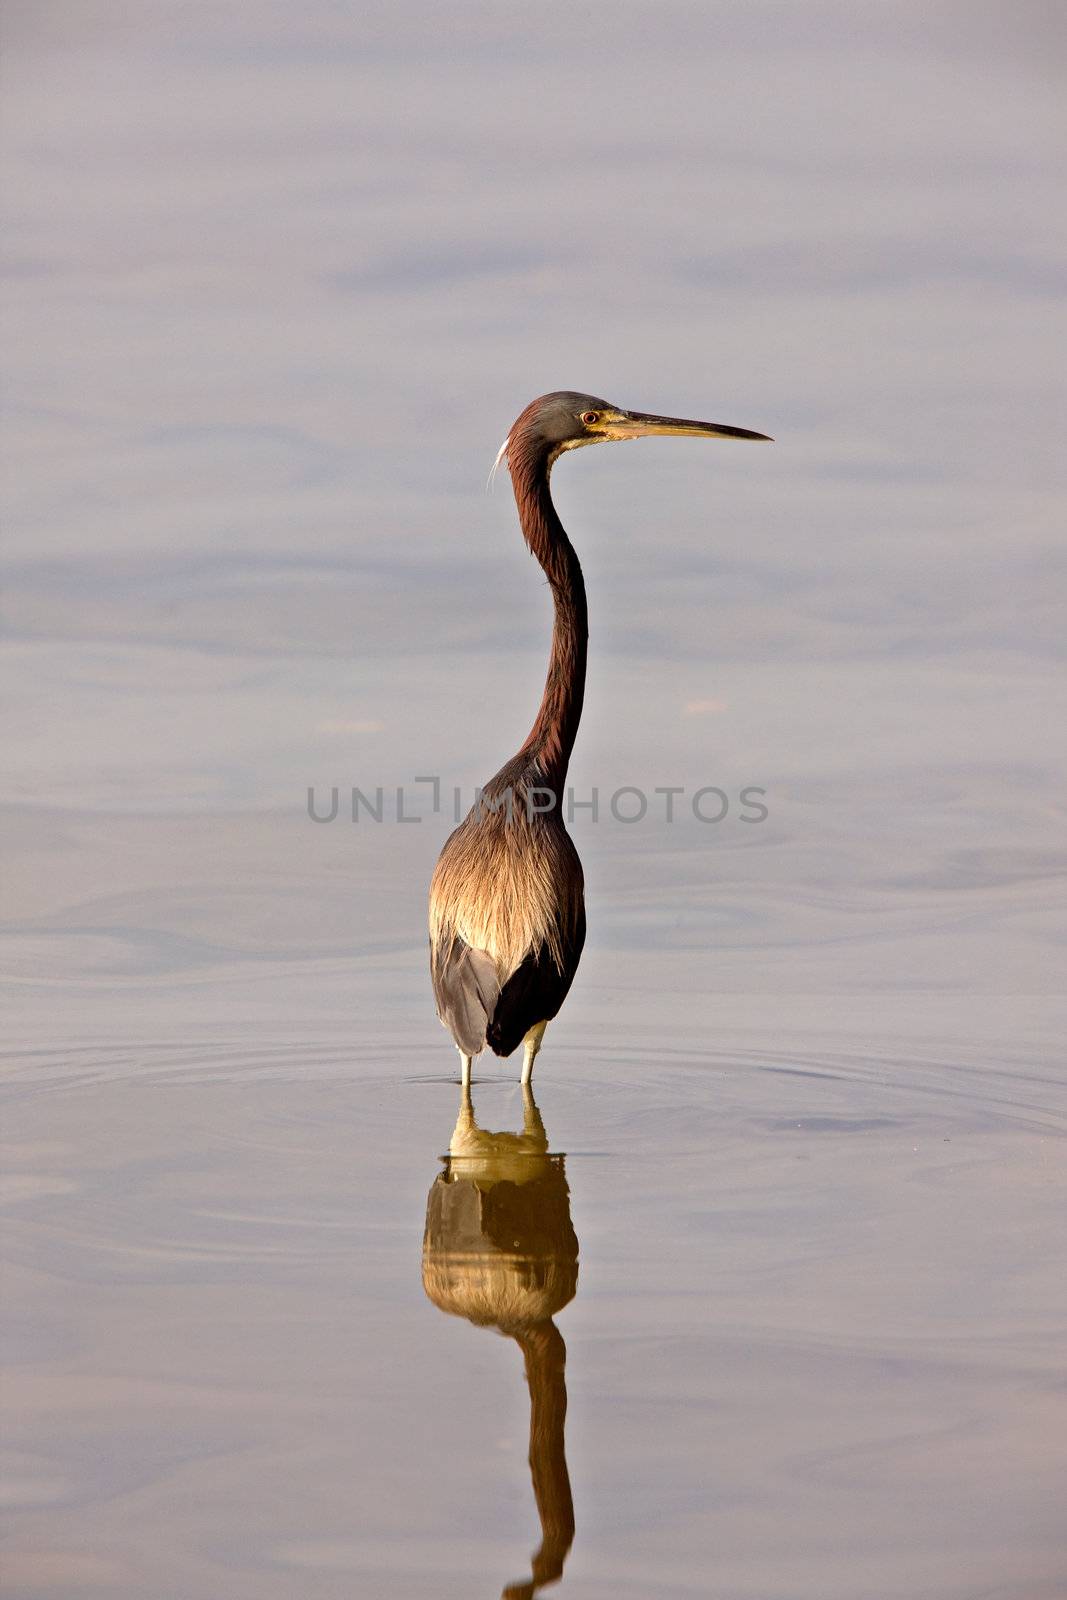 Great Blue Heron in Florida waters by pictureguy